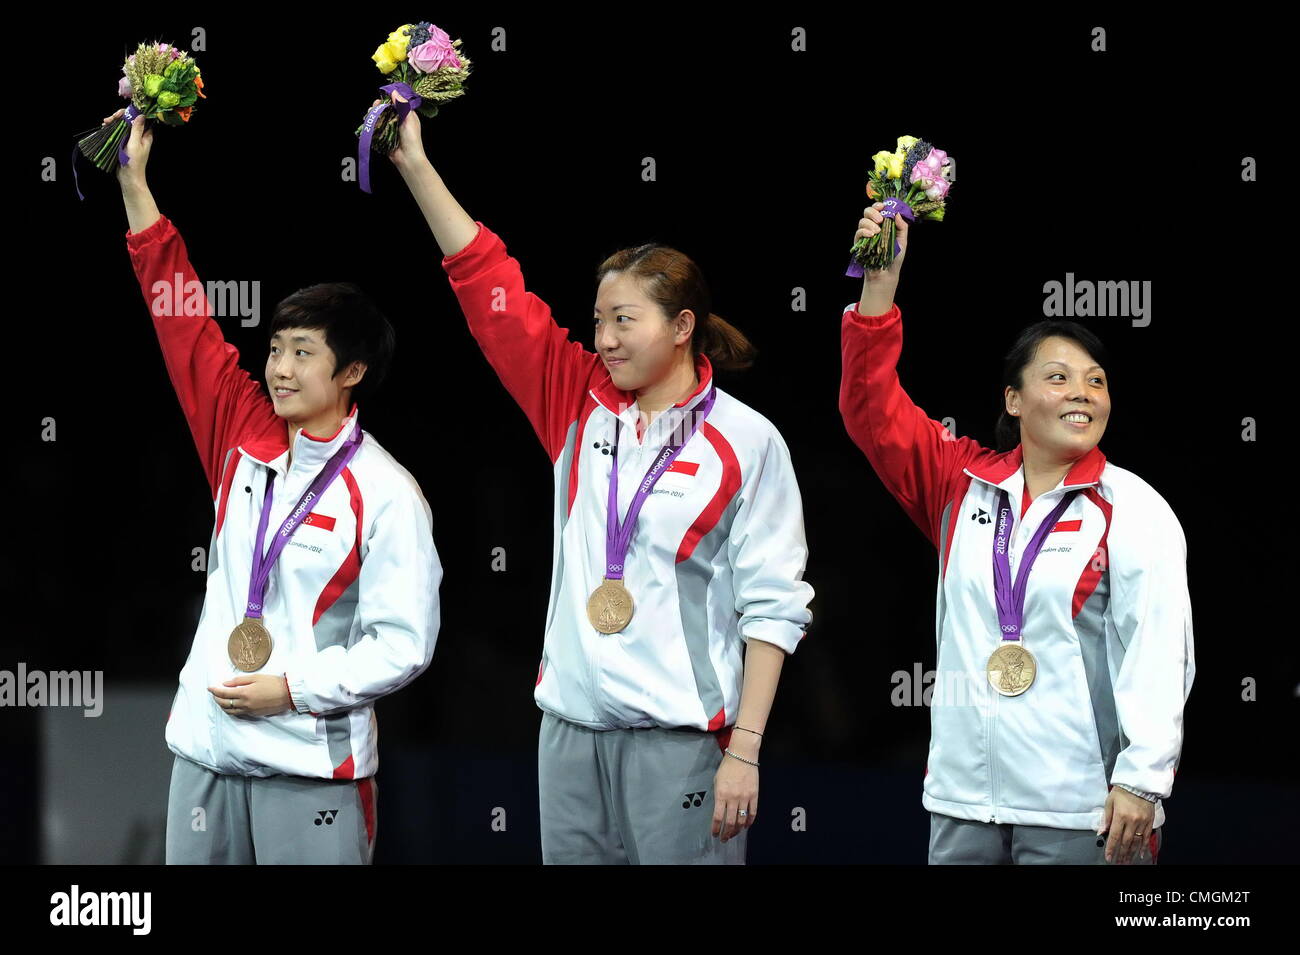 07.08.2012.  London, ENGLAND; Bronze medalists Tianwei Feng, Jiawei Li and Yuegu Wang of Singapore celebrate on the podium during the medal ceremony for the Women's Team Table Tennis gold medal match on Day 11 of the London 2012 Olympic Games at ExCeL. Stock Photo